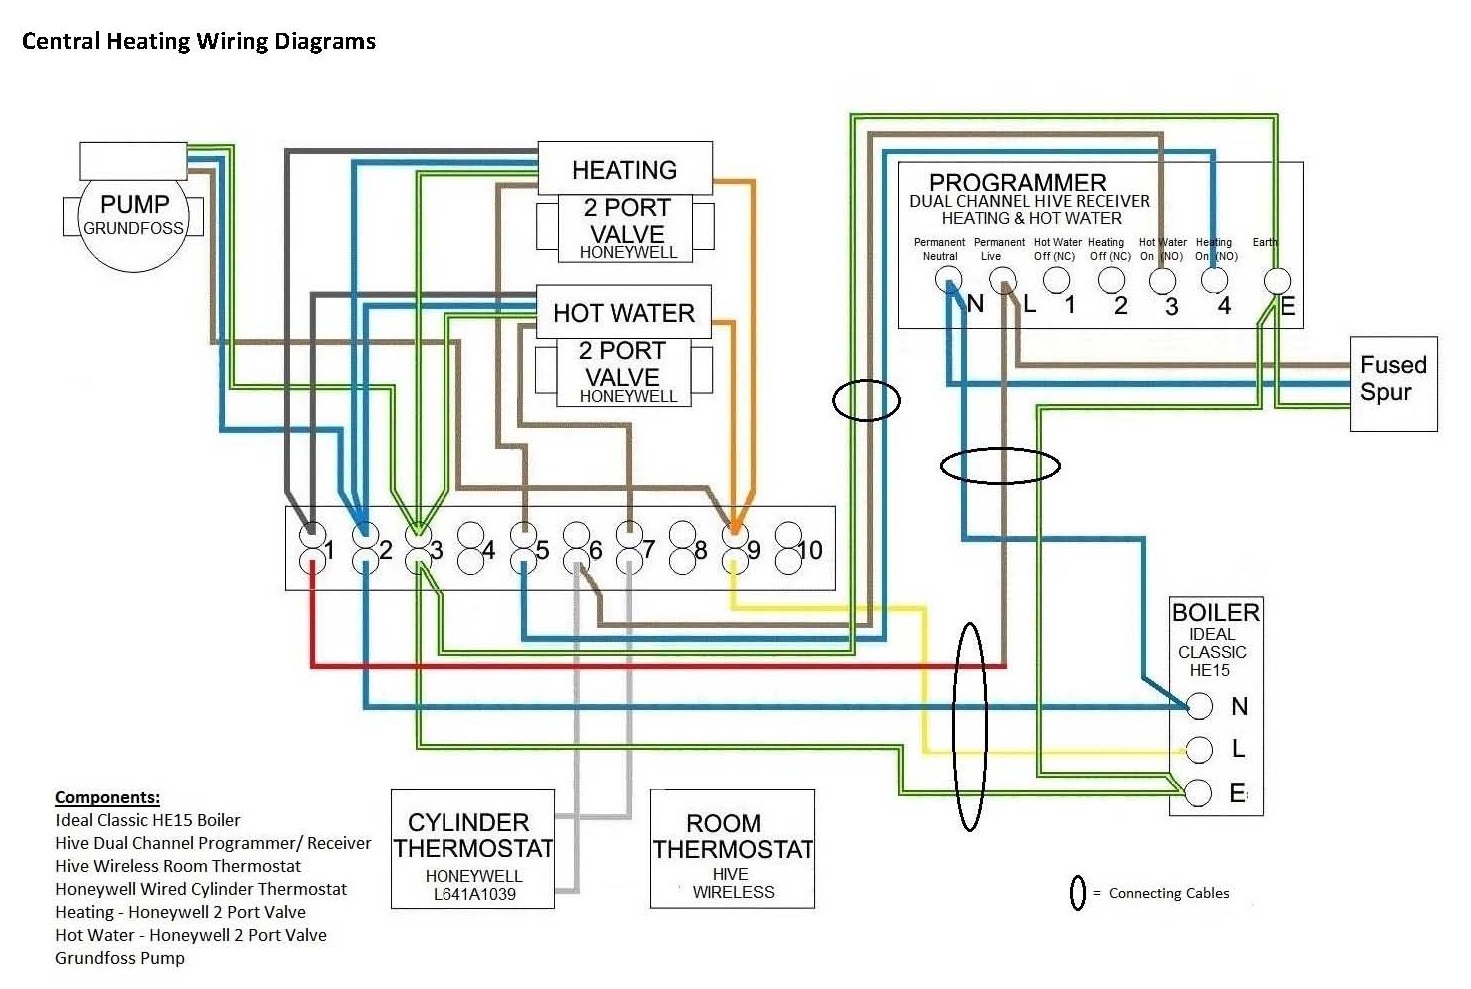 Hive And Central Heating Wiring, Honeywell Motorised Valve Wiring Diagram